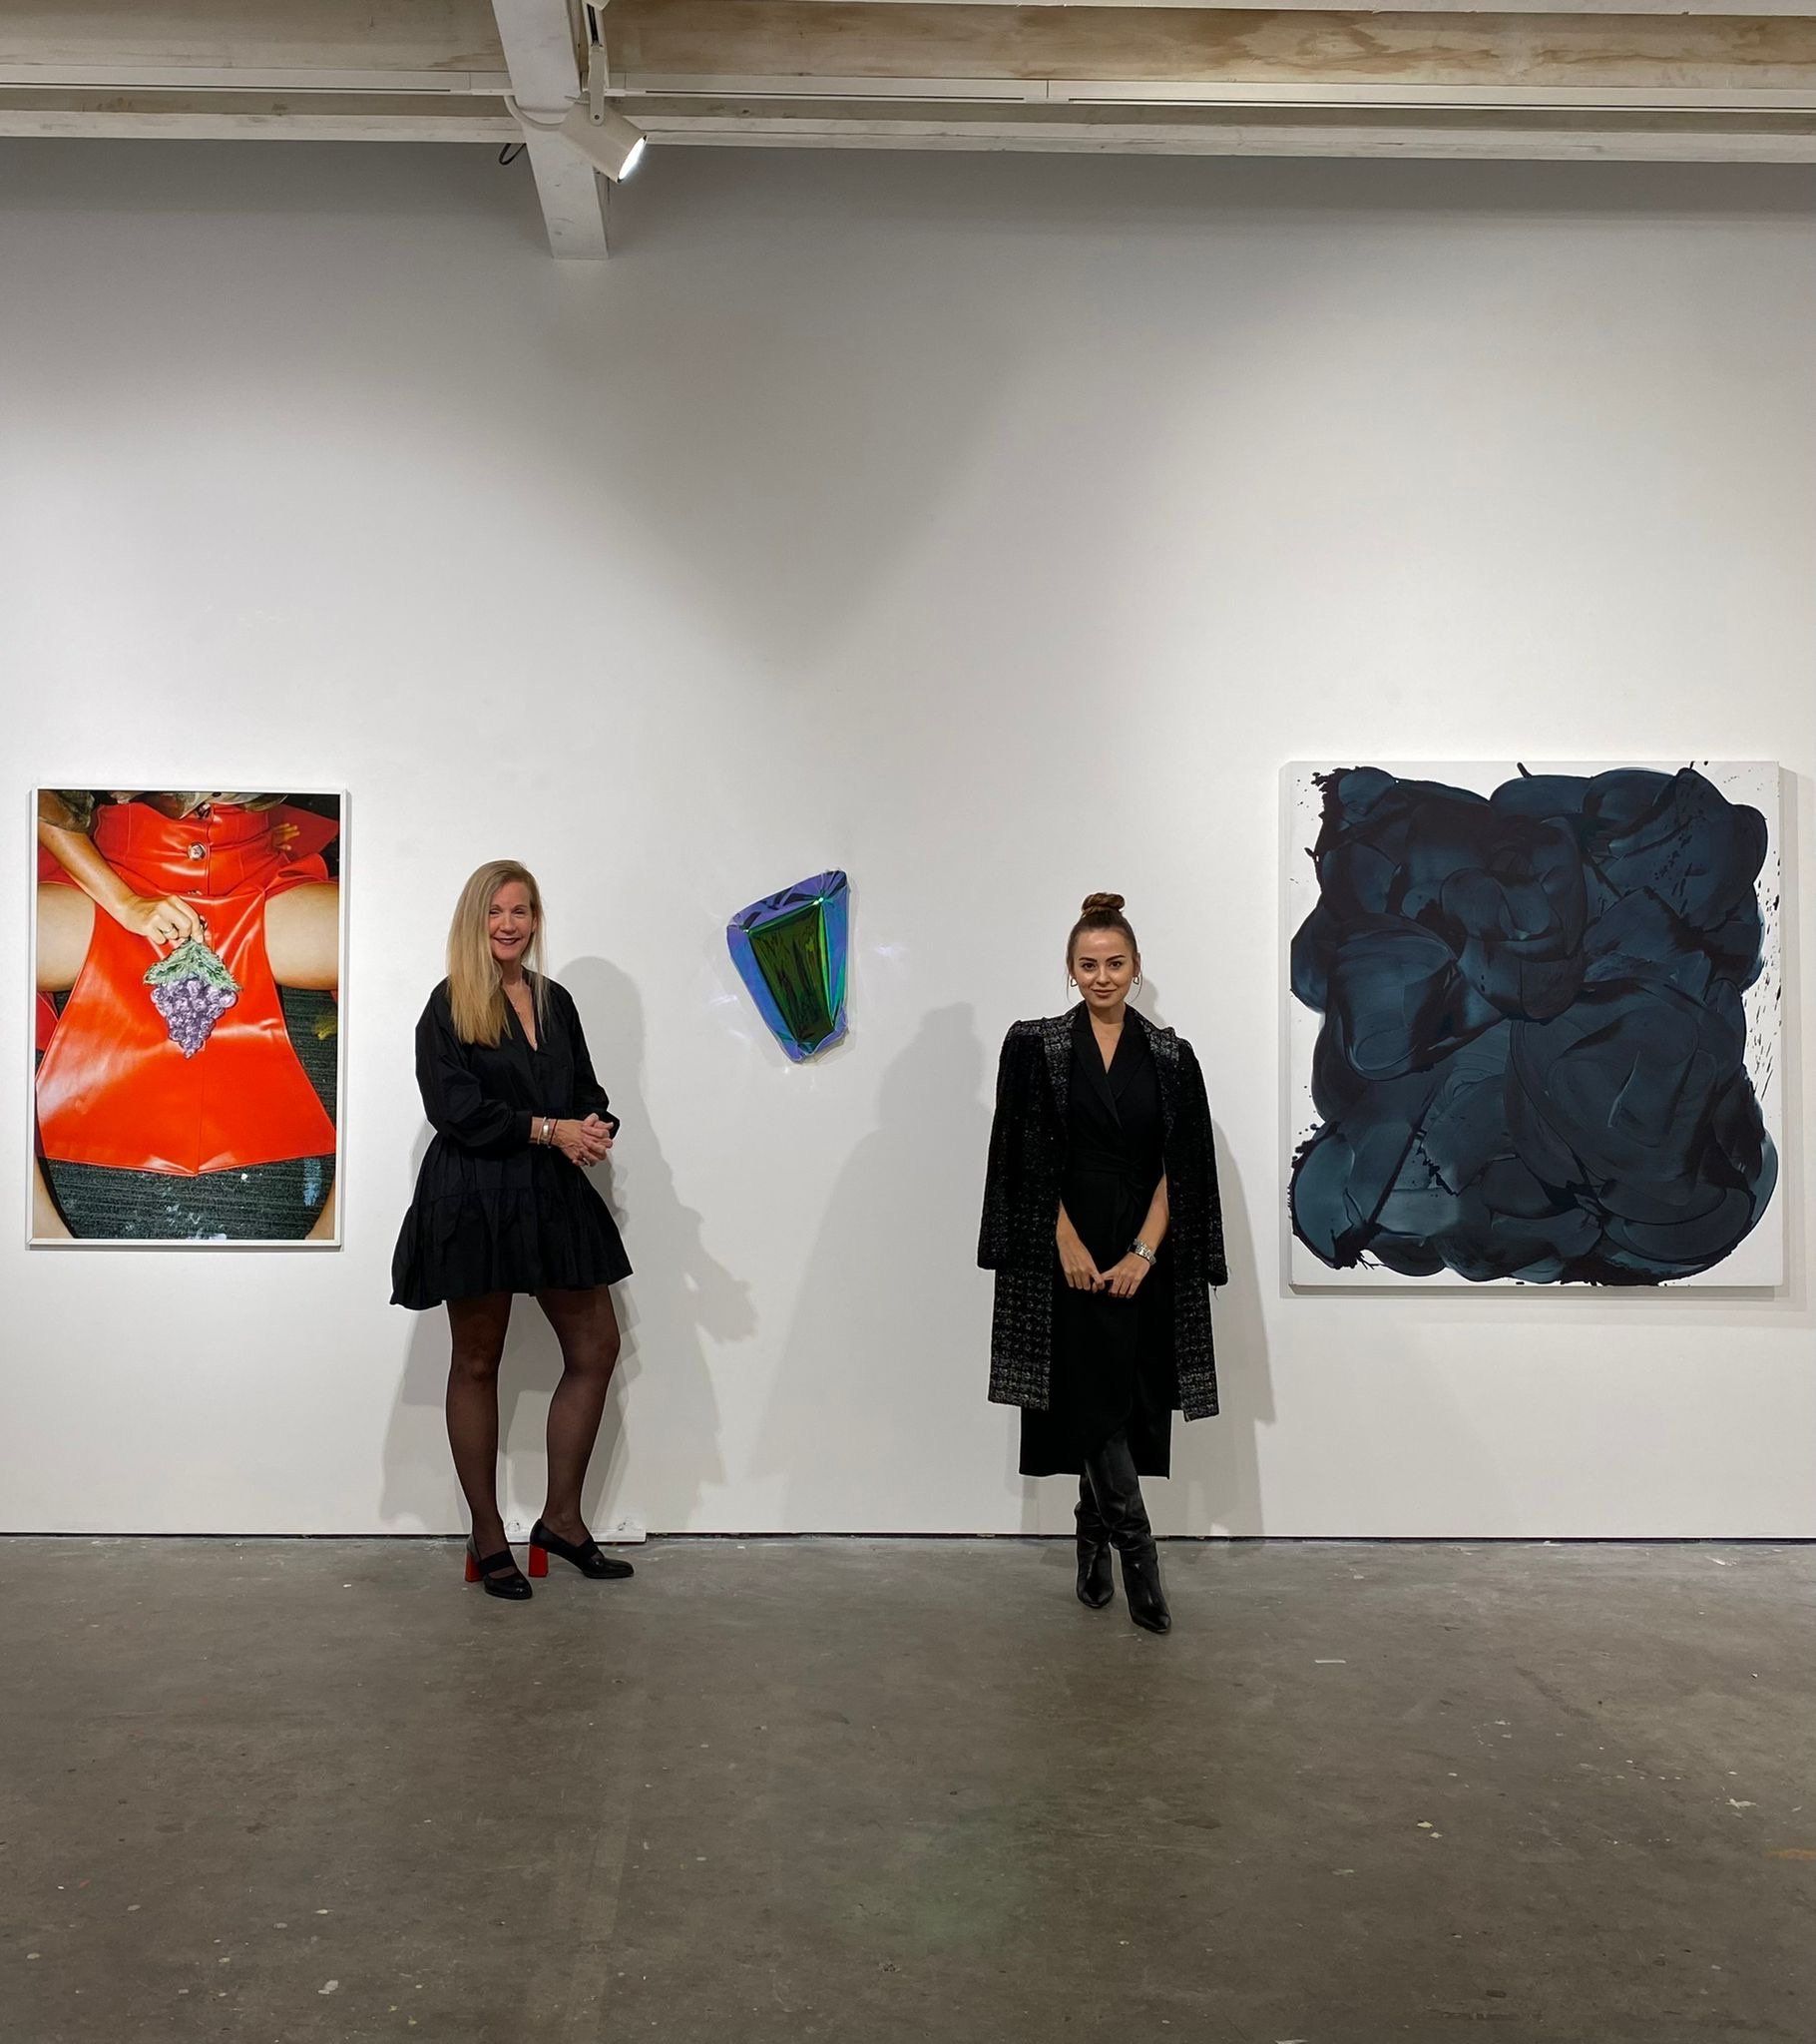 Artist Stacie McCormick with Maria Korolevskaya at the exhibition's opening